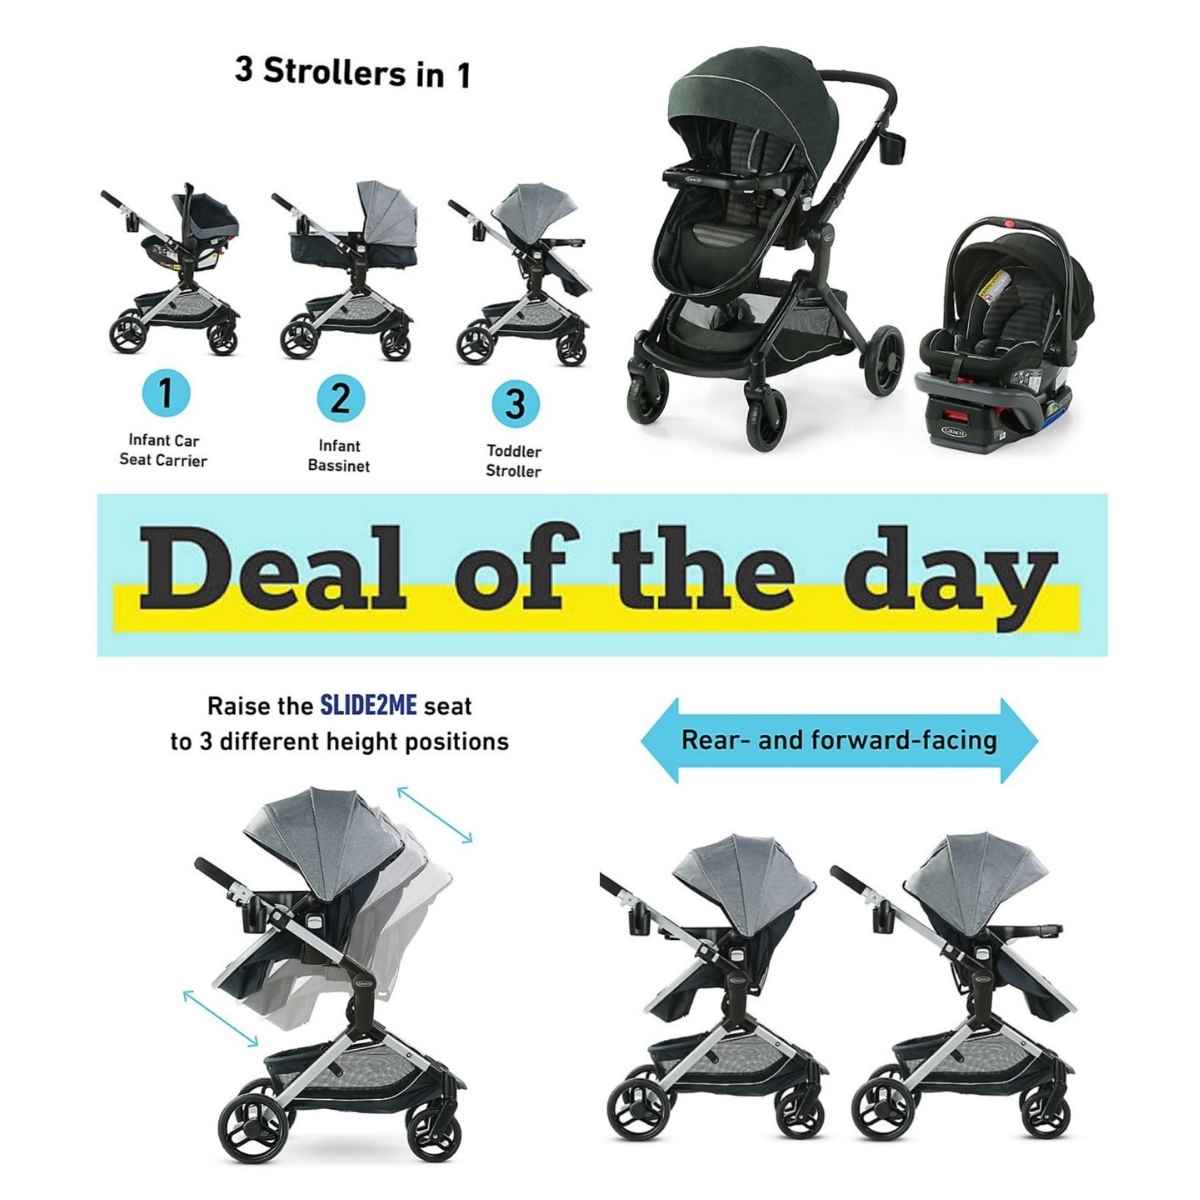 Graco modes nest DLX travel system is on sale for 269.99